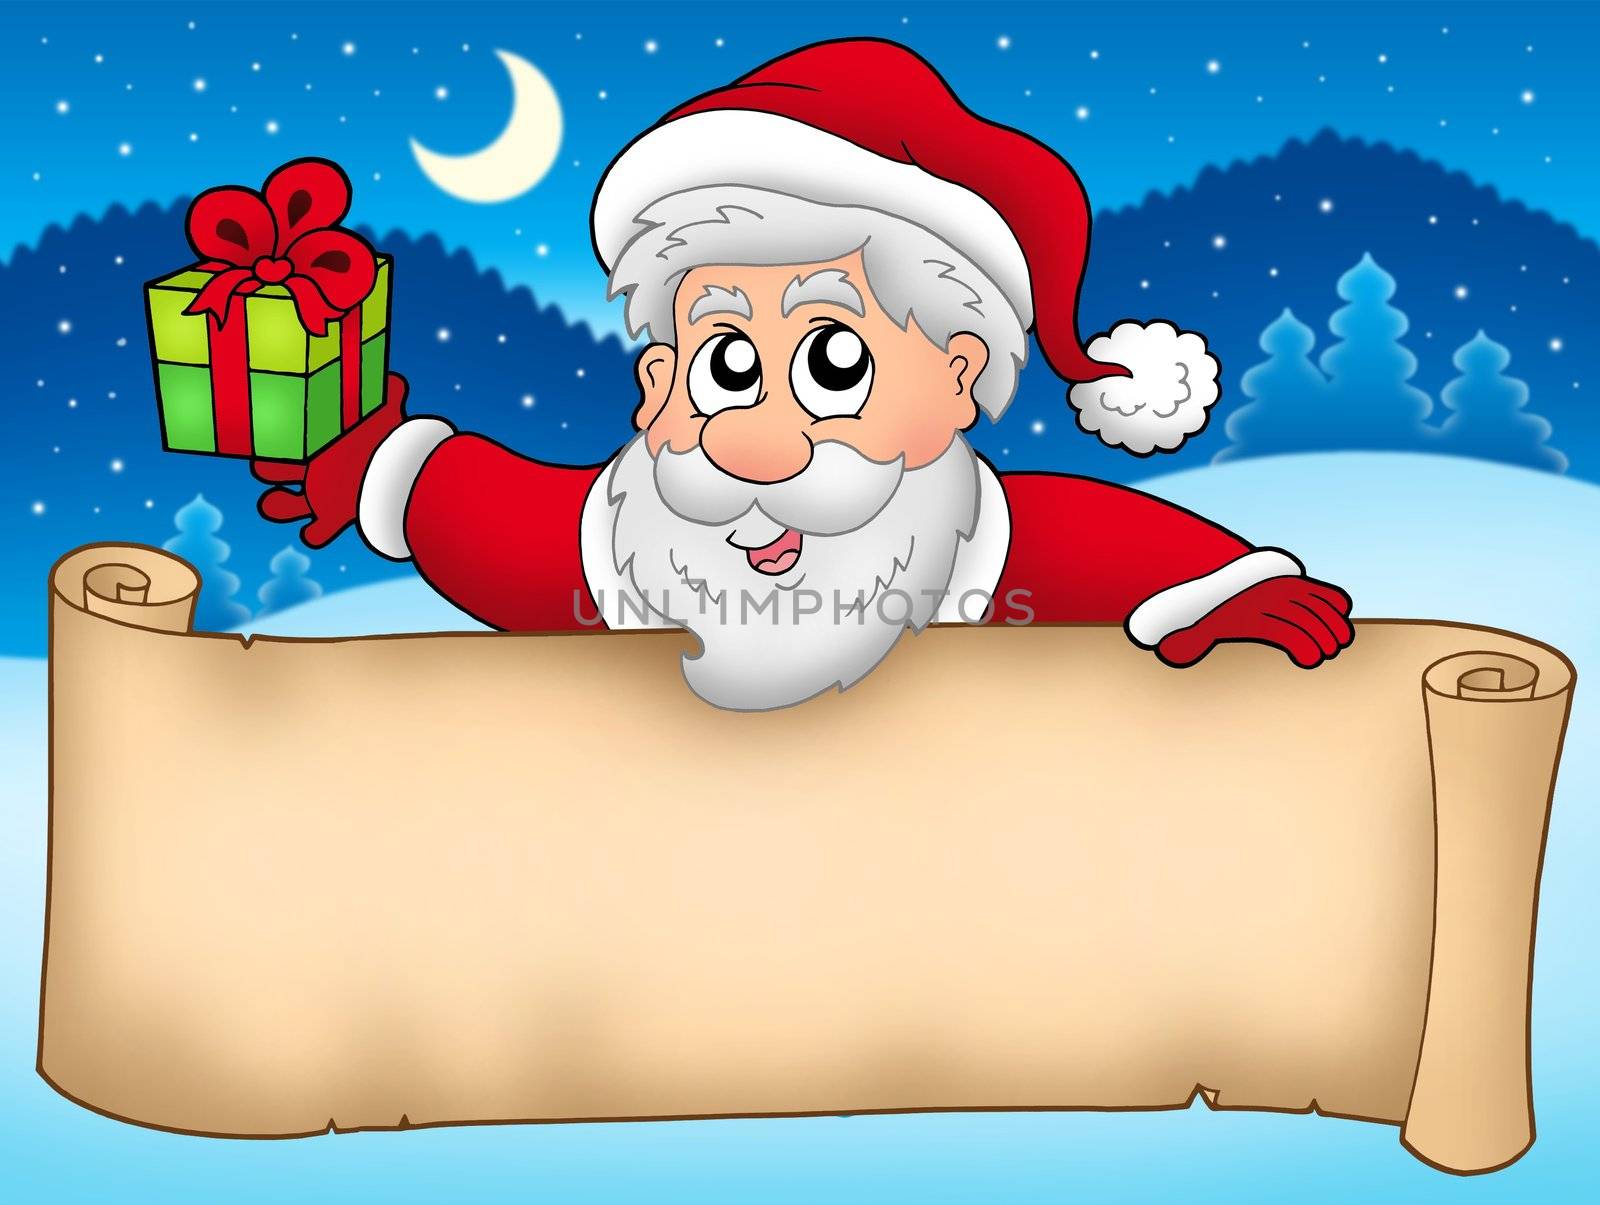 Banner with cute Santa Claus - color illustration.